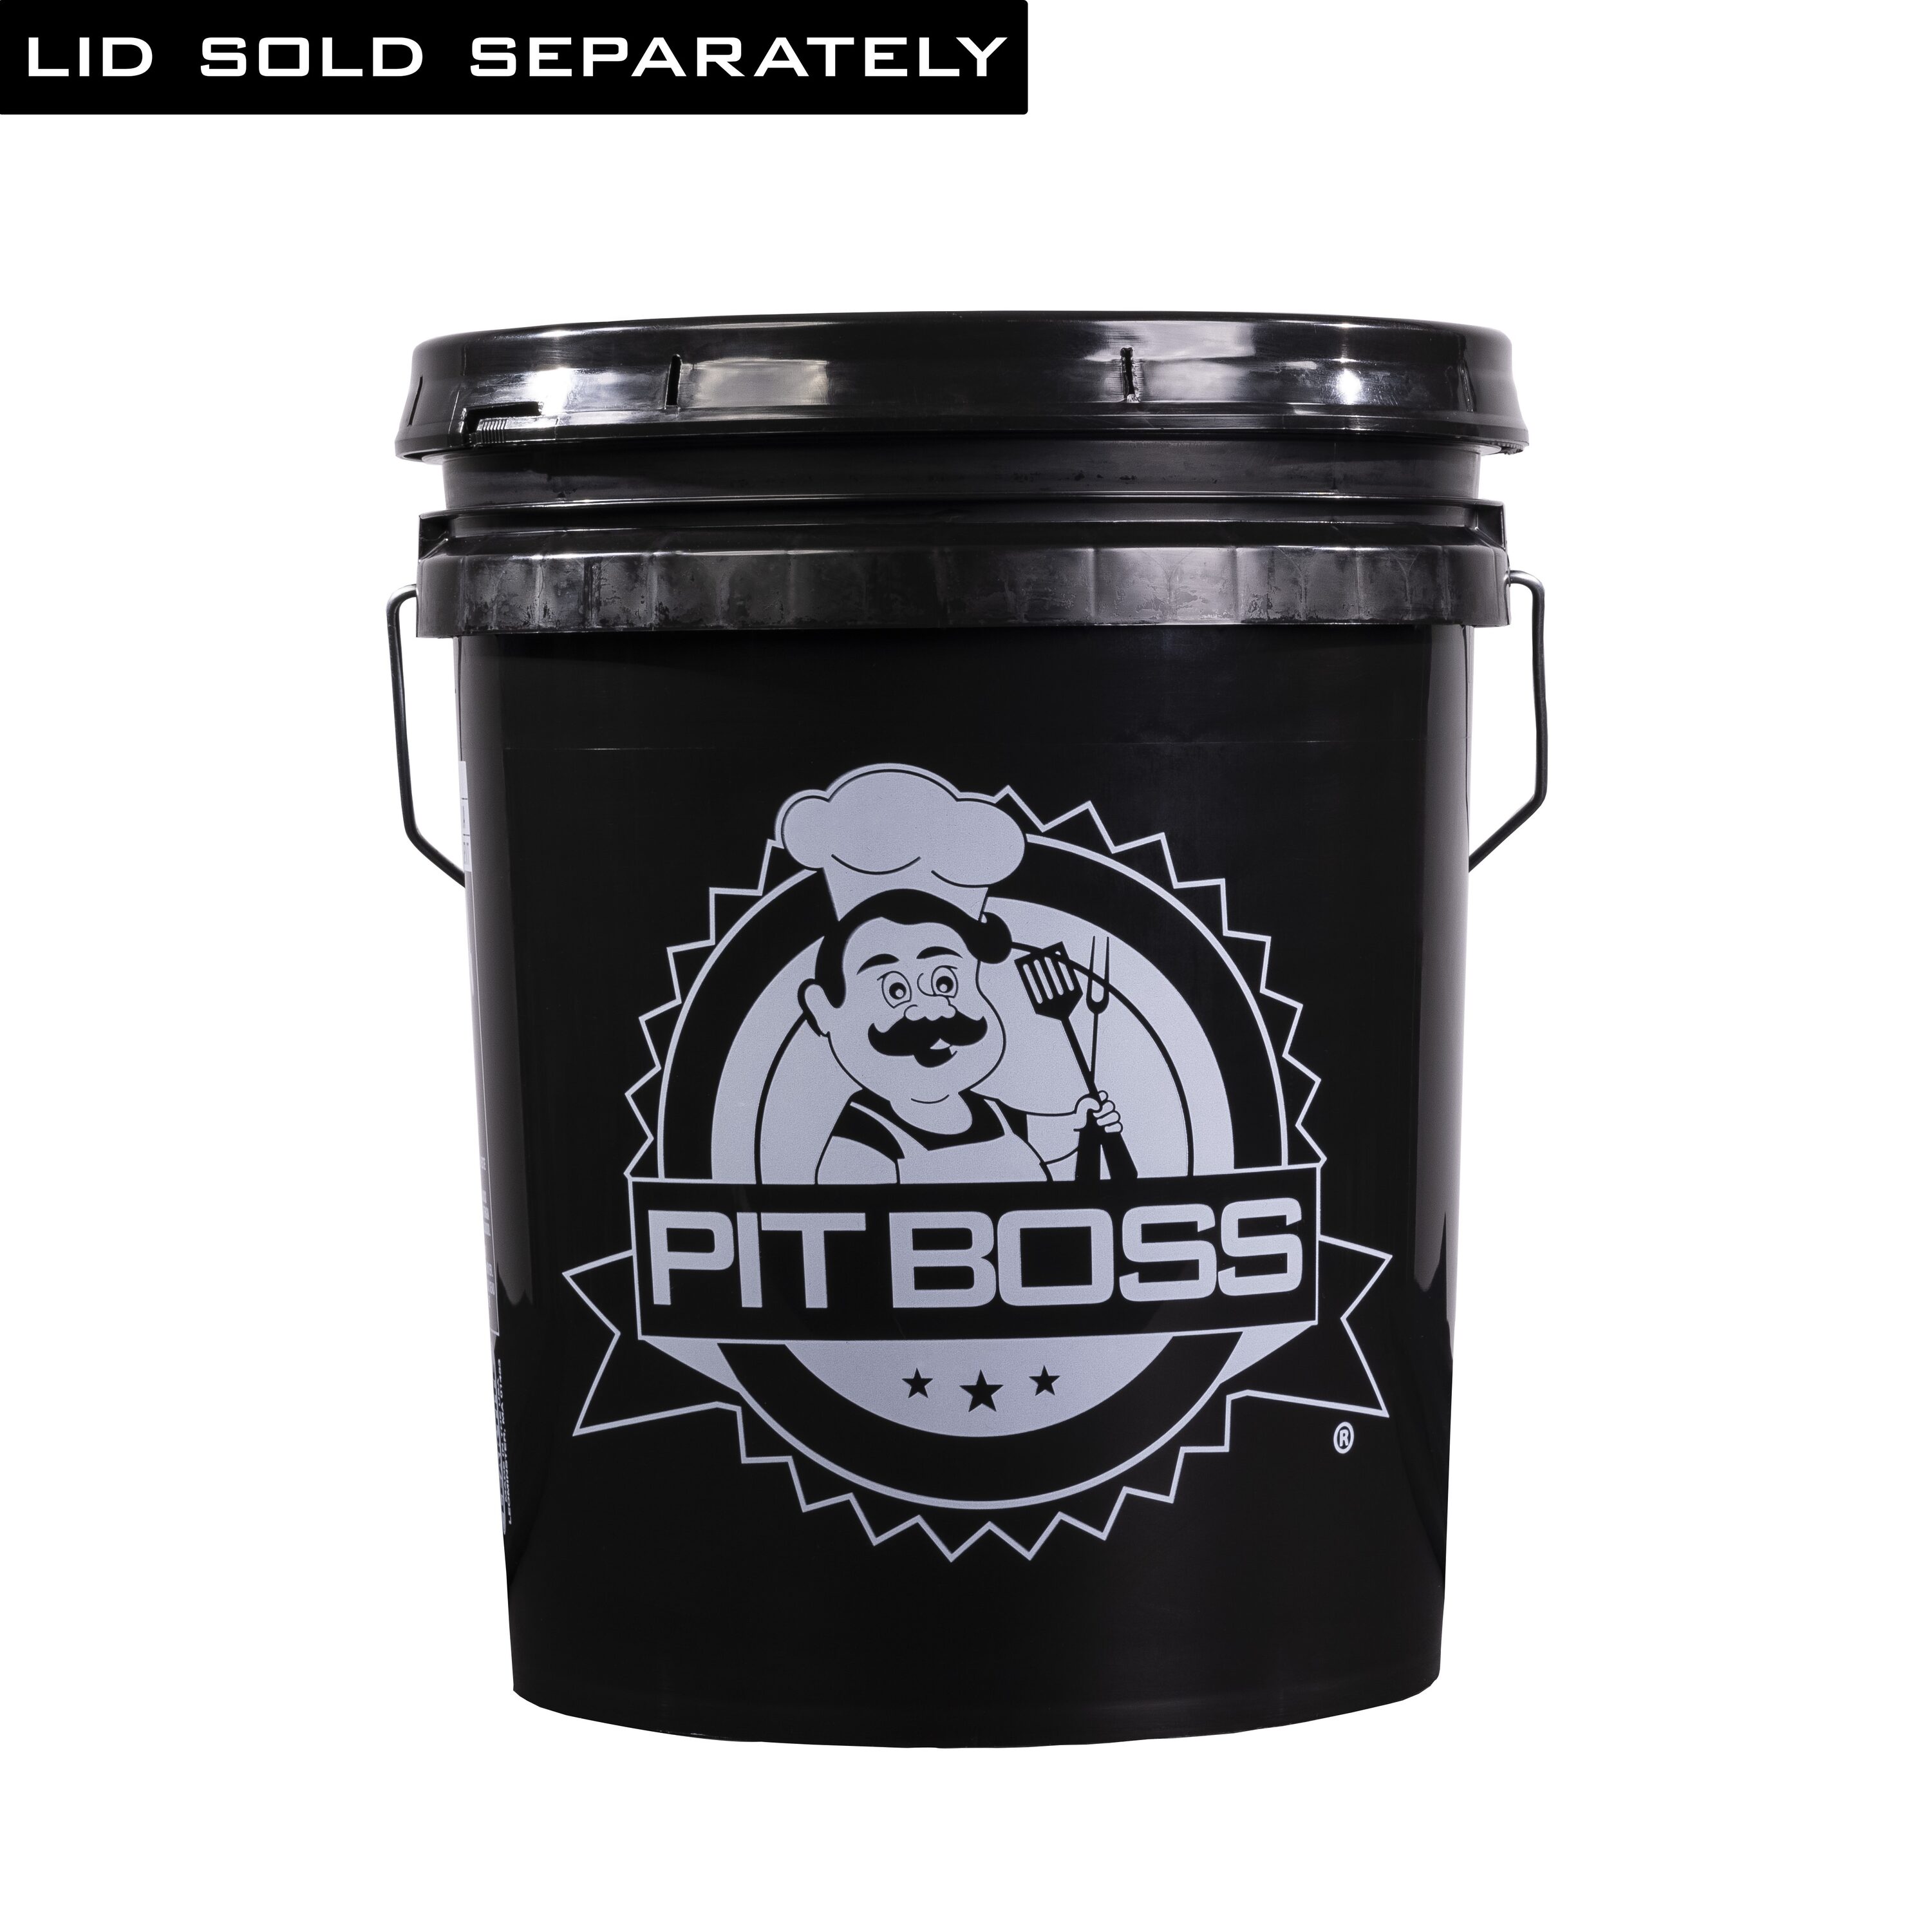 5 Pit Boss Accessory Reviews: The Best Pit Boss Accessories